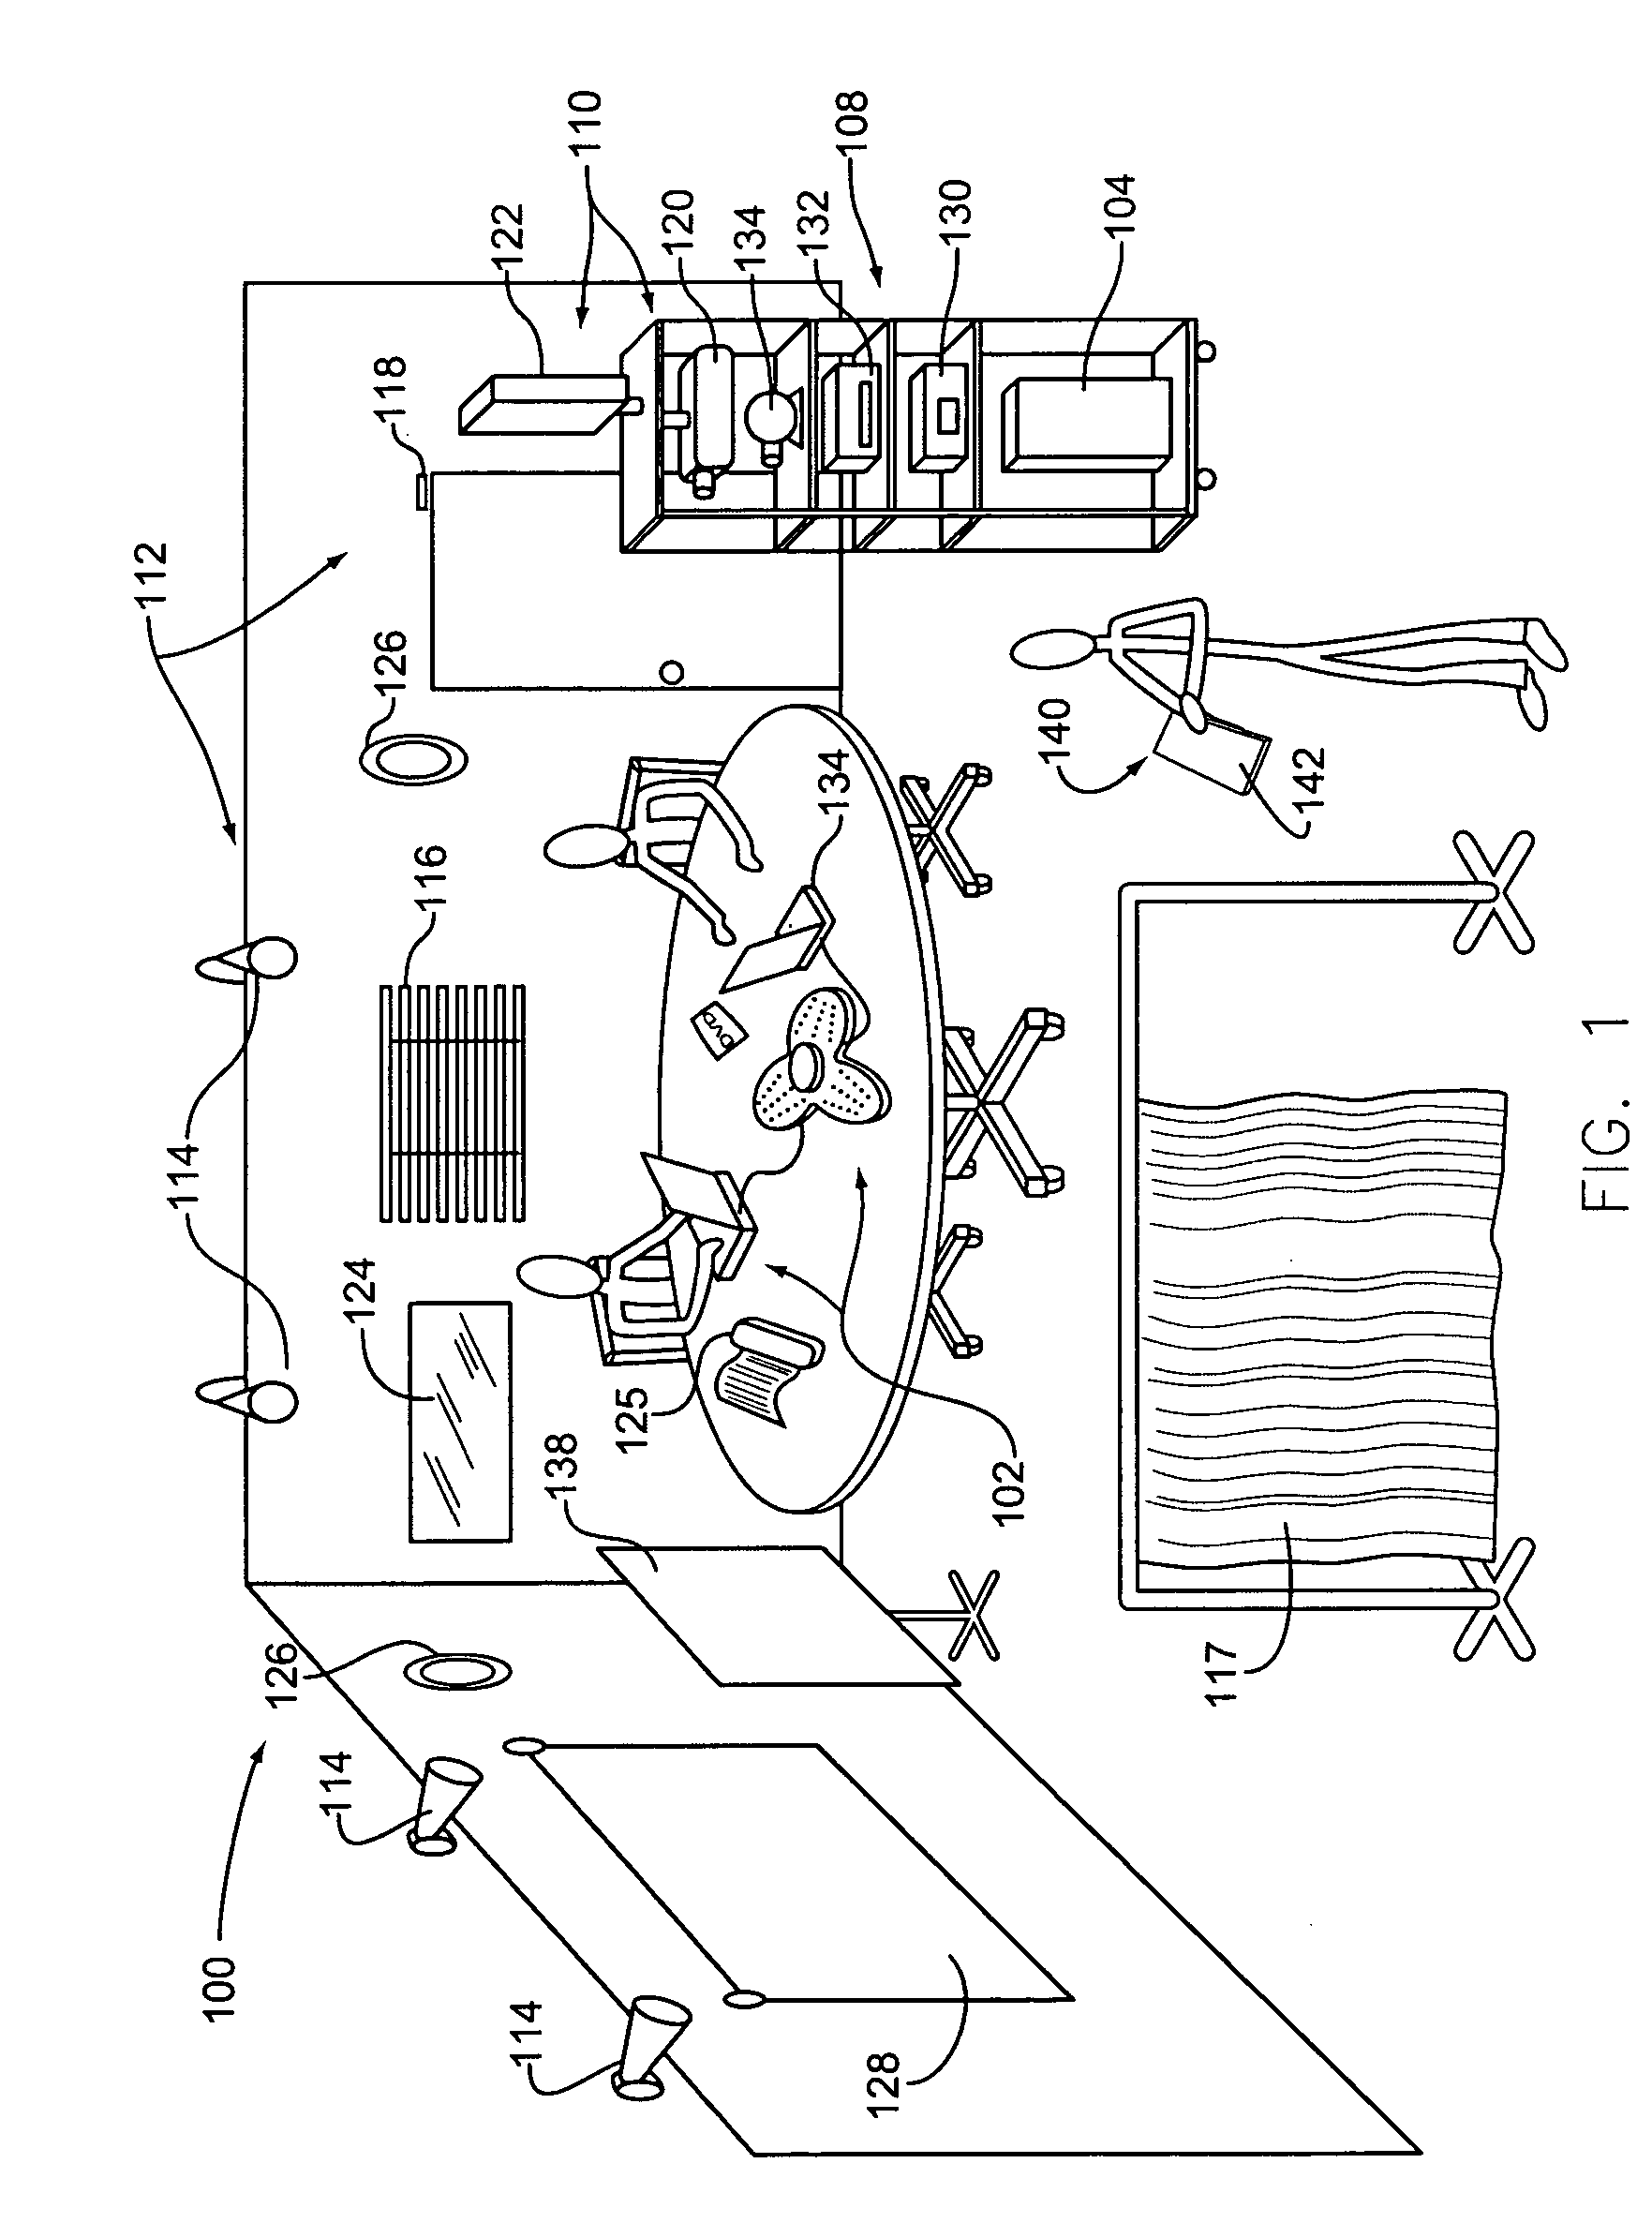 System for controlling a video display